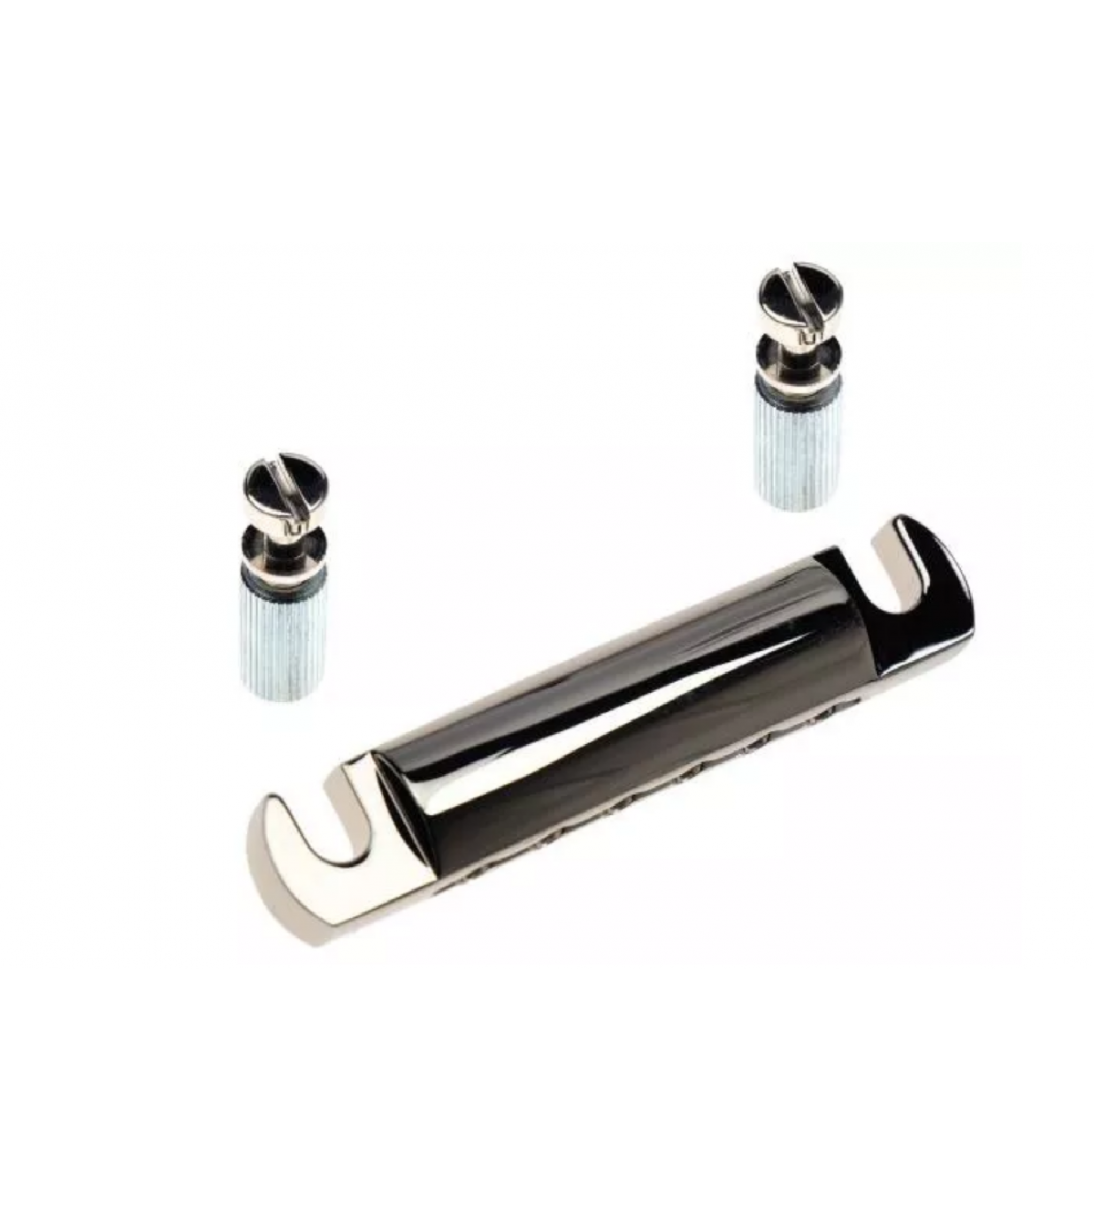 Nickel Stop Bar With Studs & Inserts